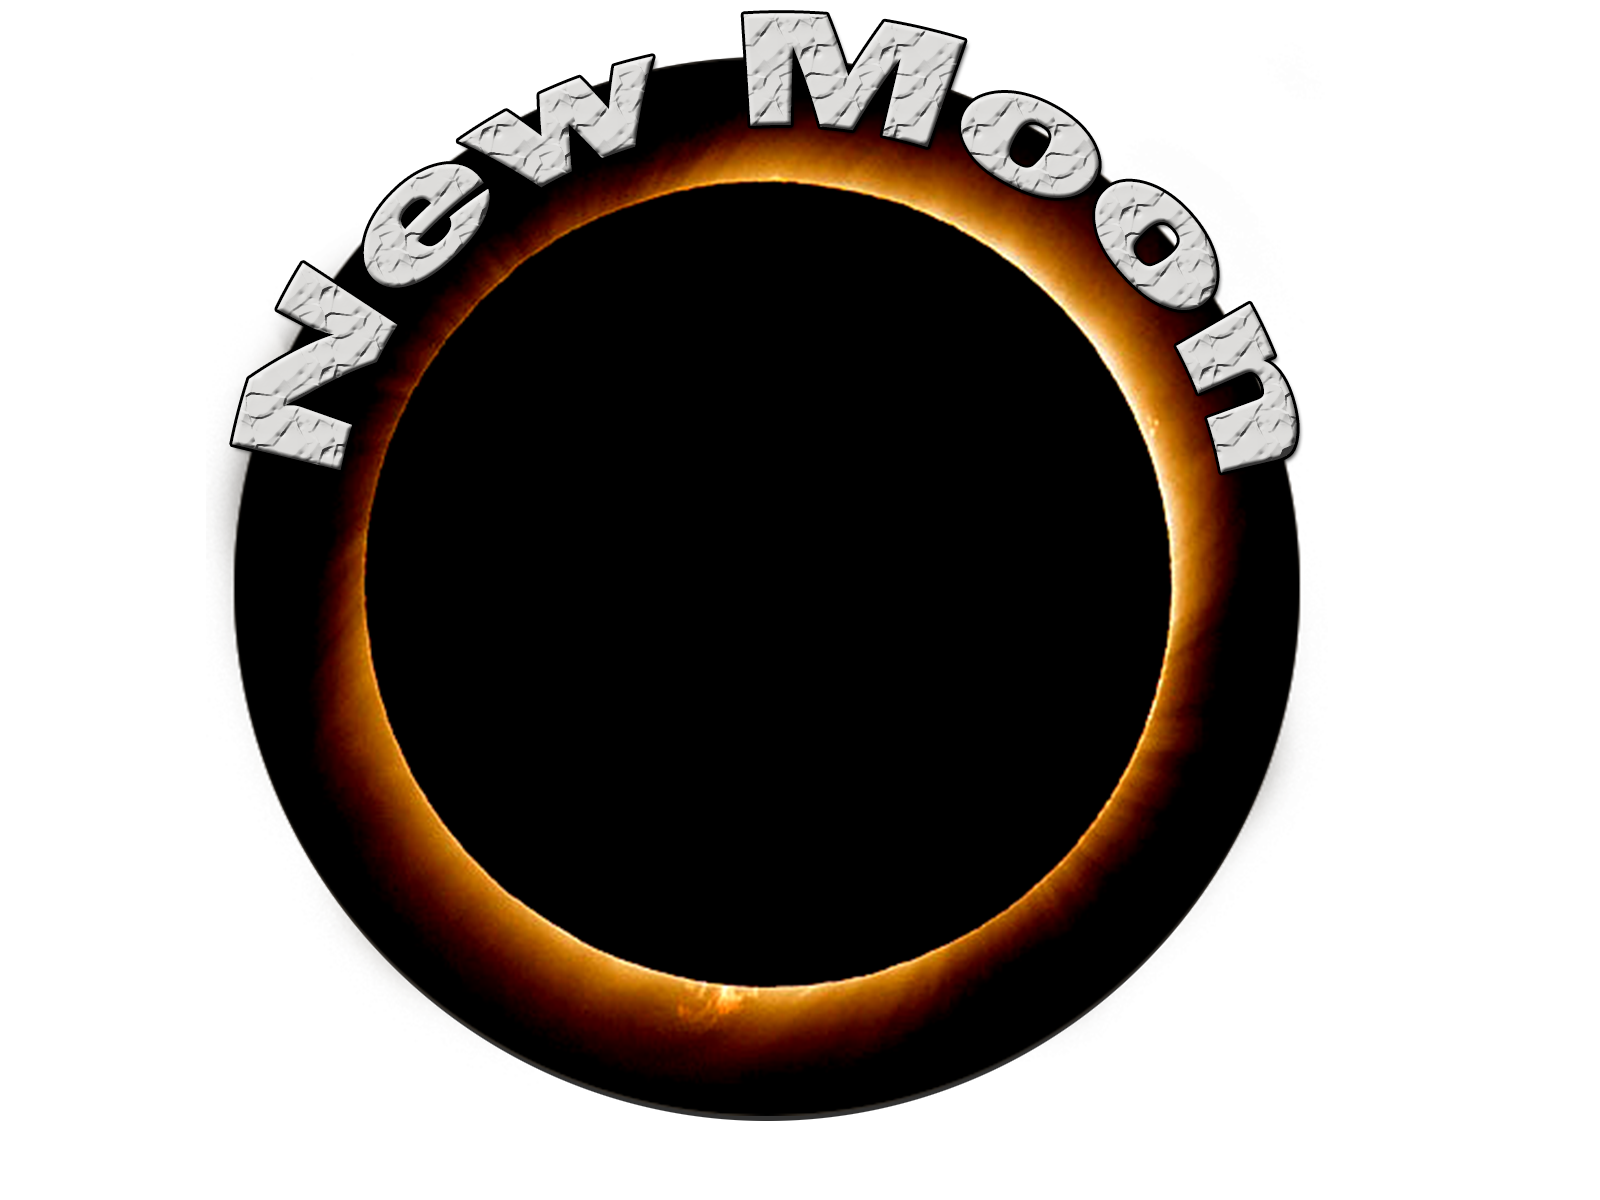 The New Moon